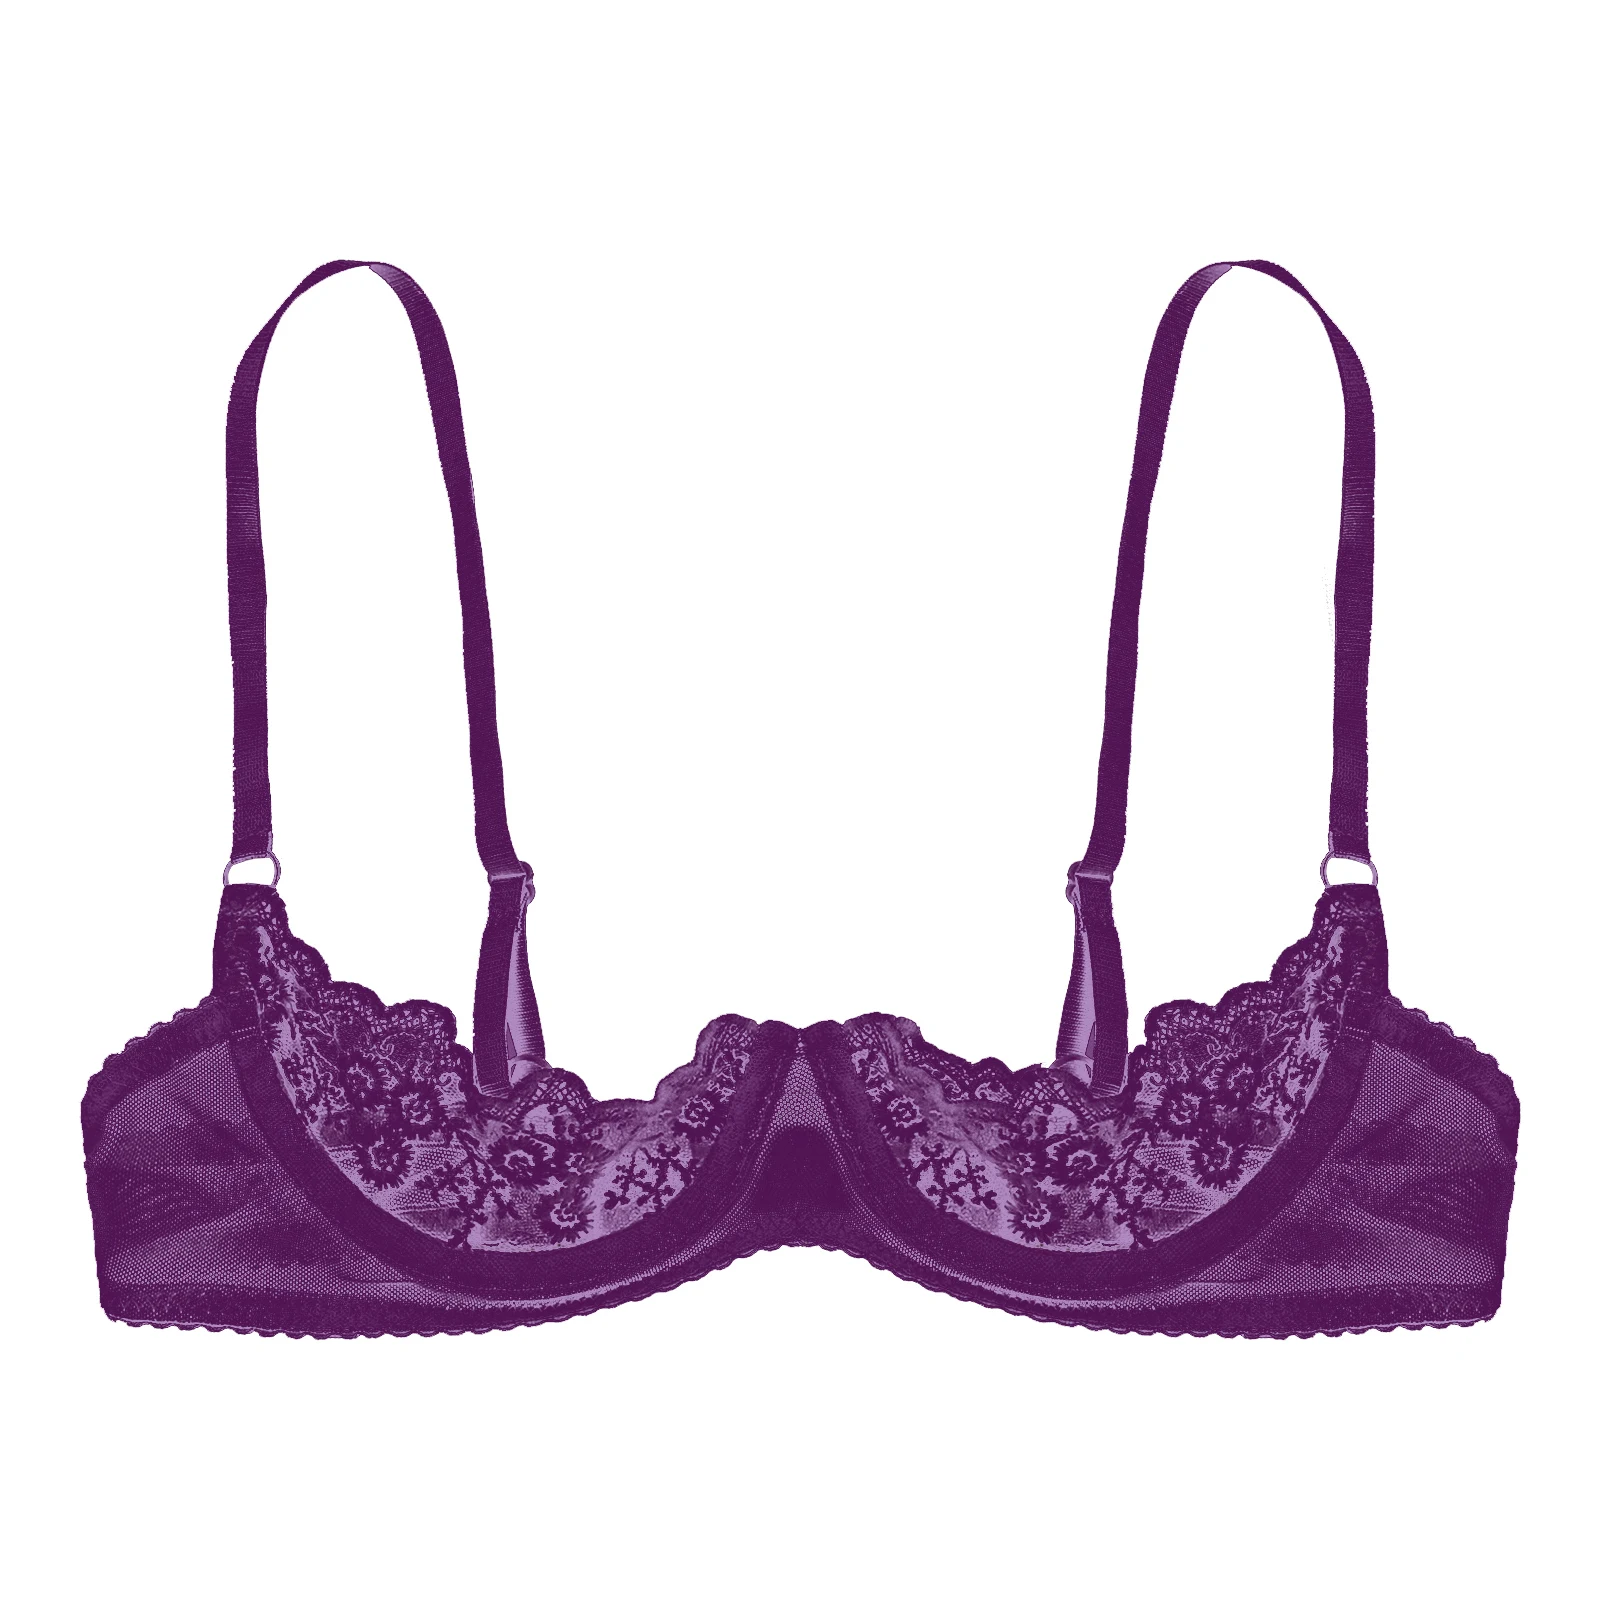 Floral Lace Open Night Cupless Bra Set Sexy Lingerie For Women